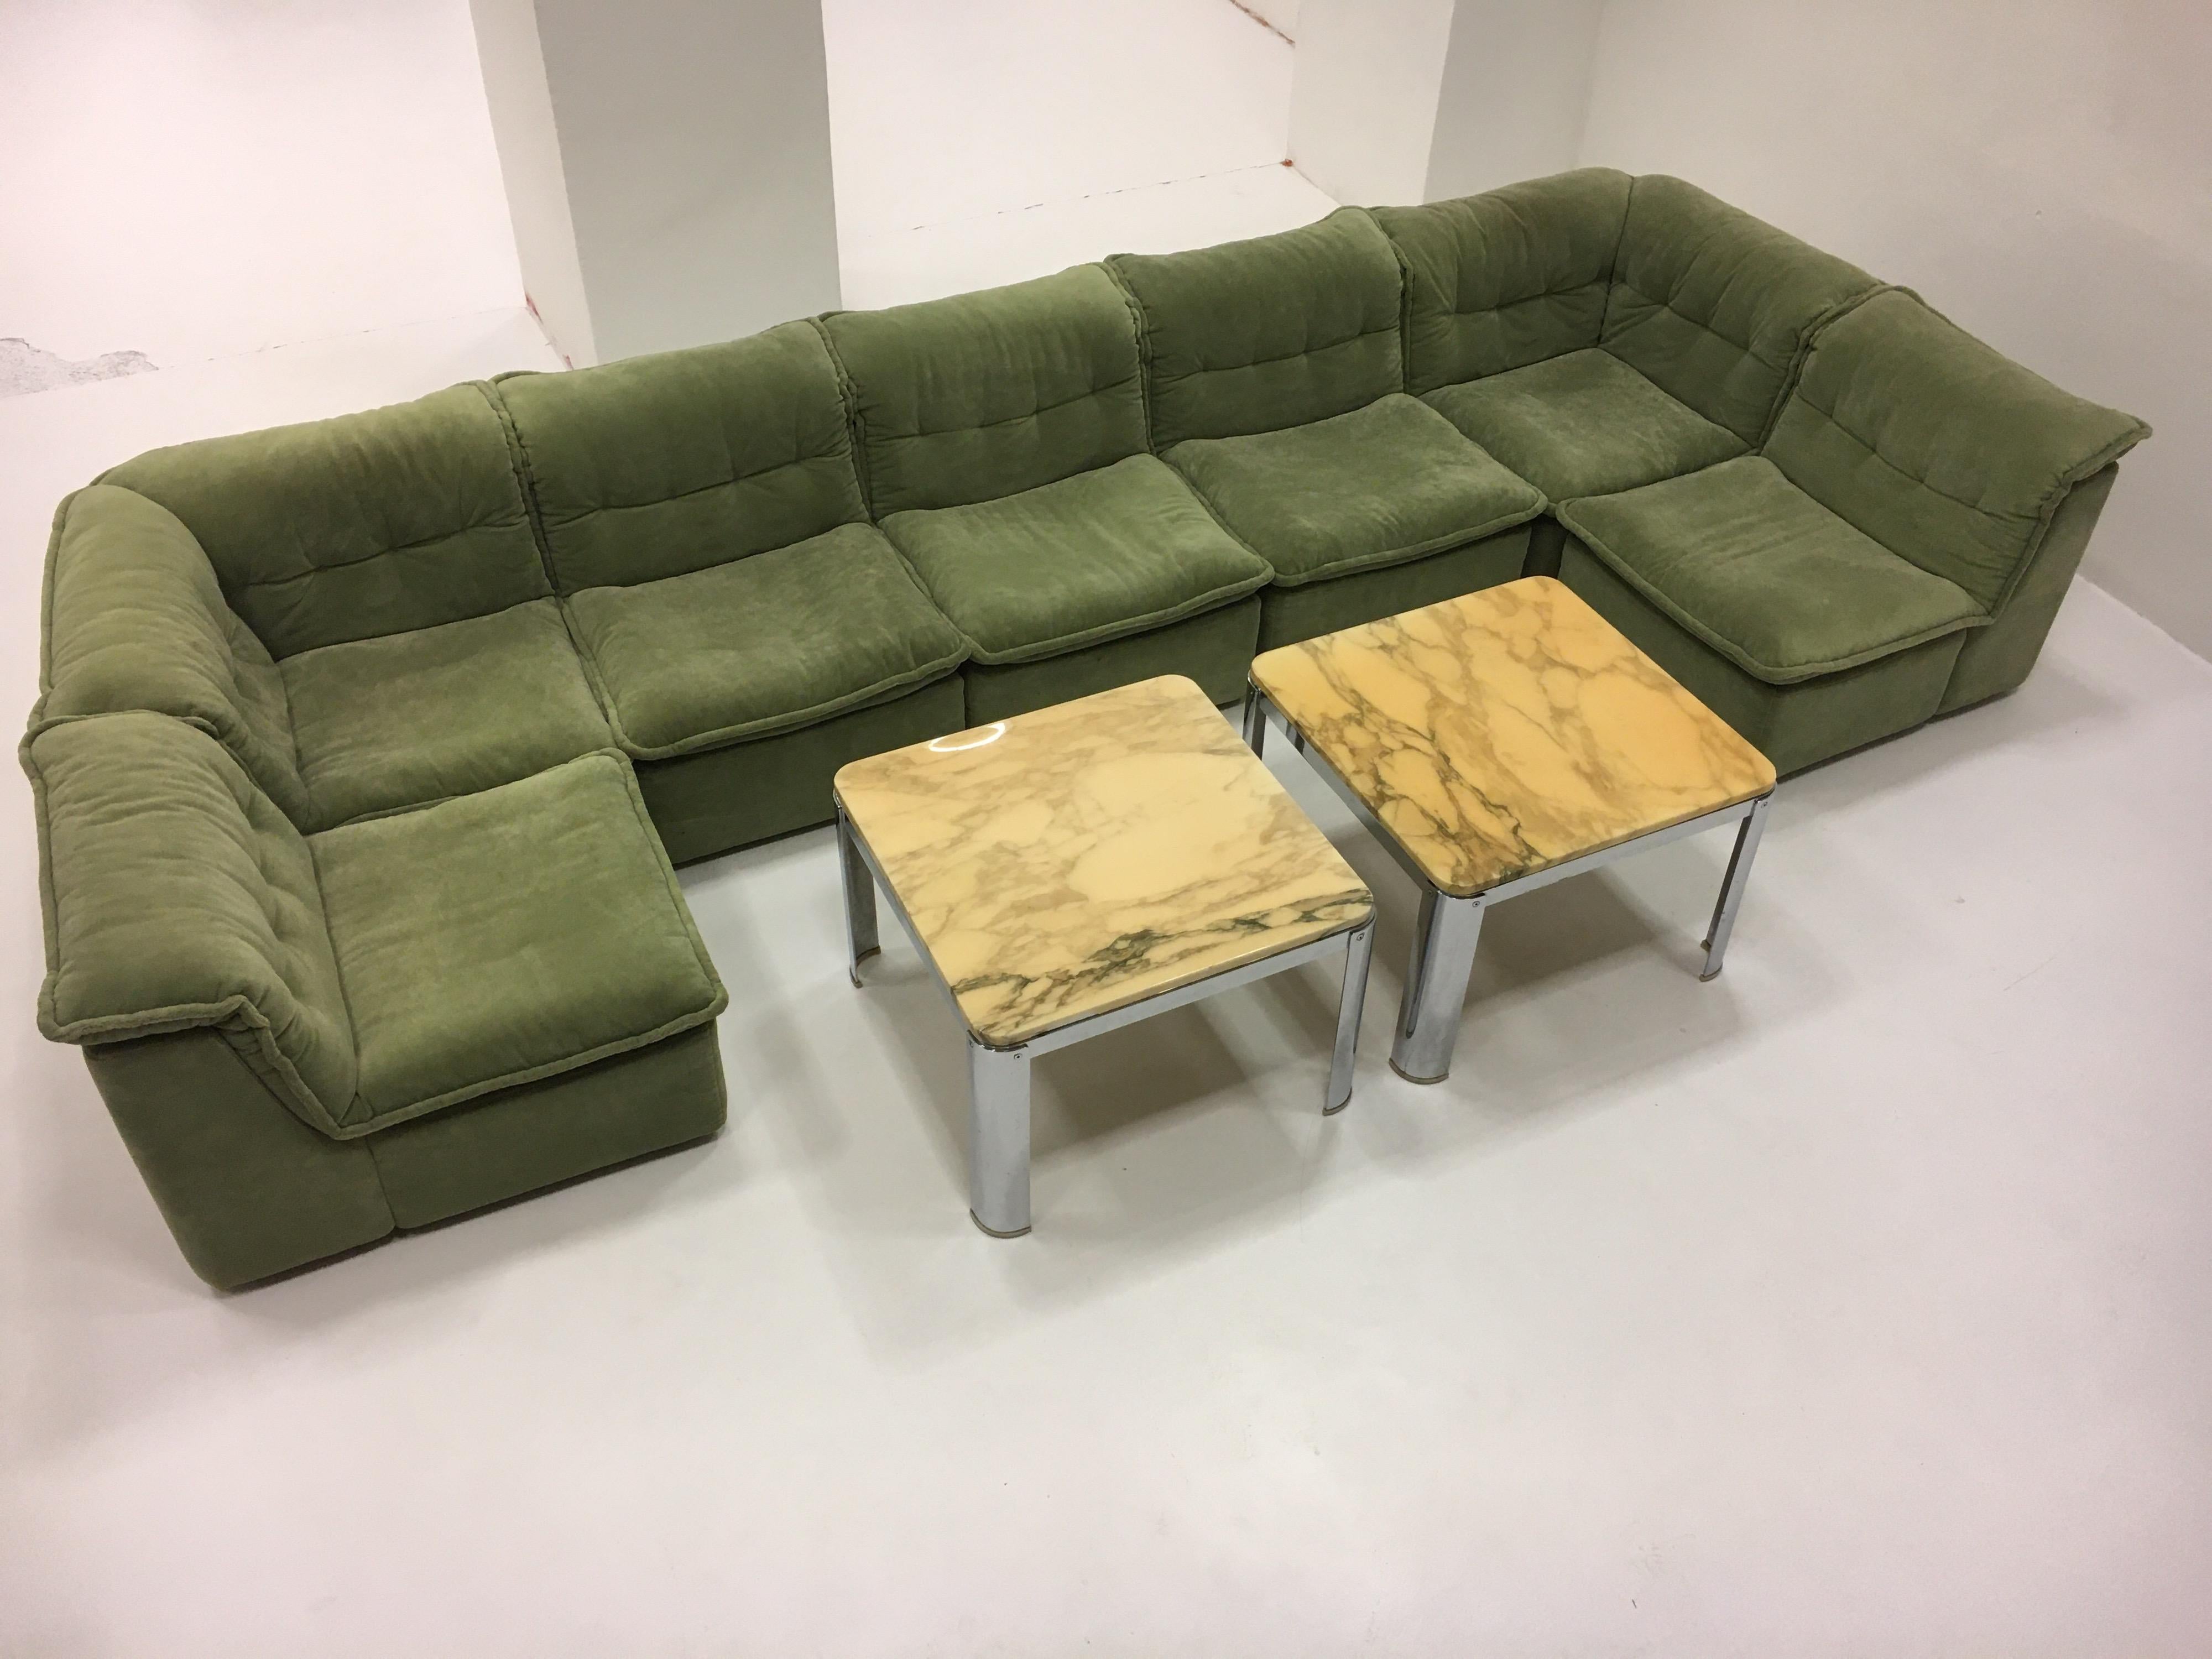 Vintage Rolf Benz modular sectional sofa suite, Germany, 1970. A fantastic modern vintage modular sofa in a lovely soft brushed light green fabric. The set consists of seven sectional elements which were designed to be arranged as a U-shape group or